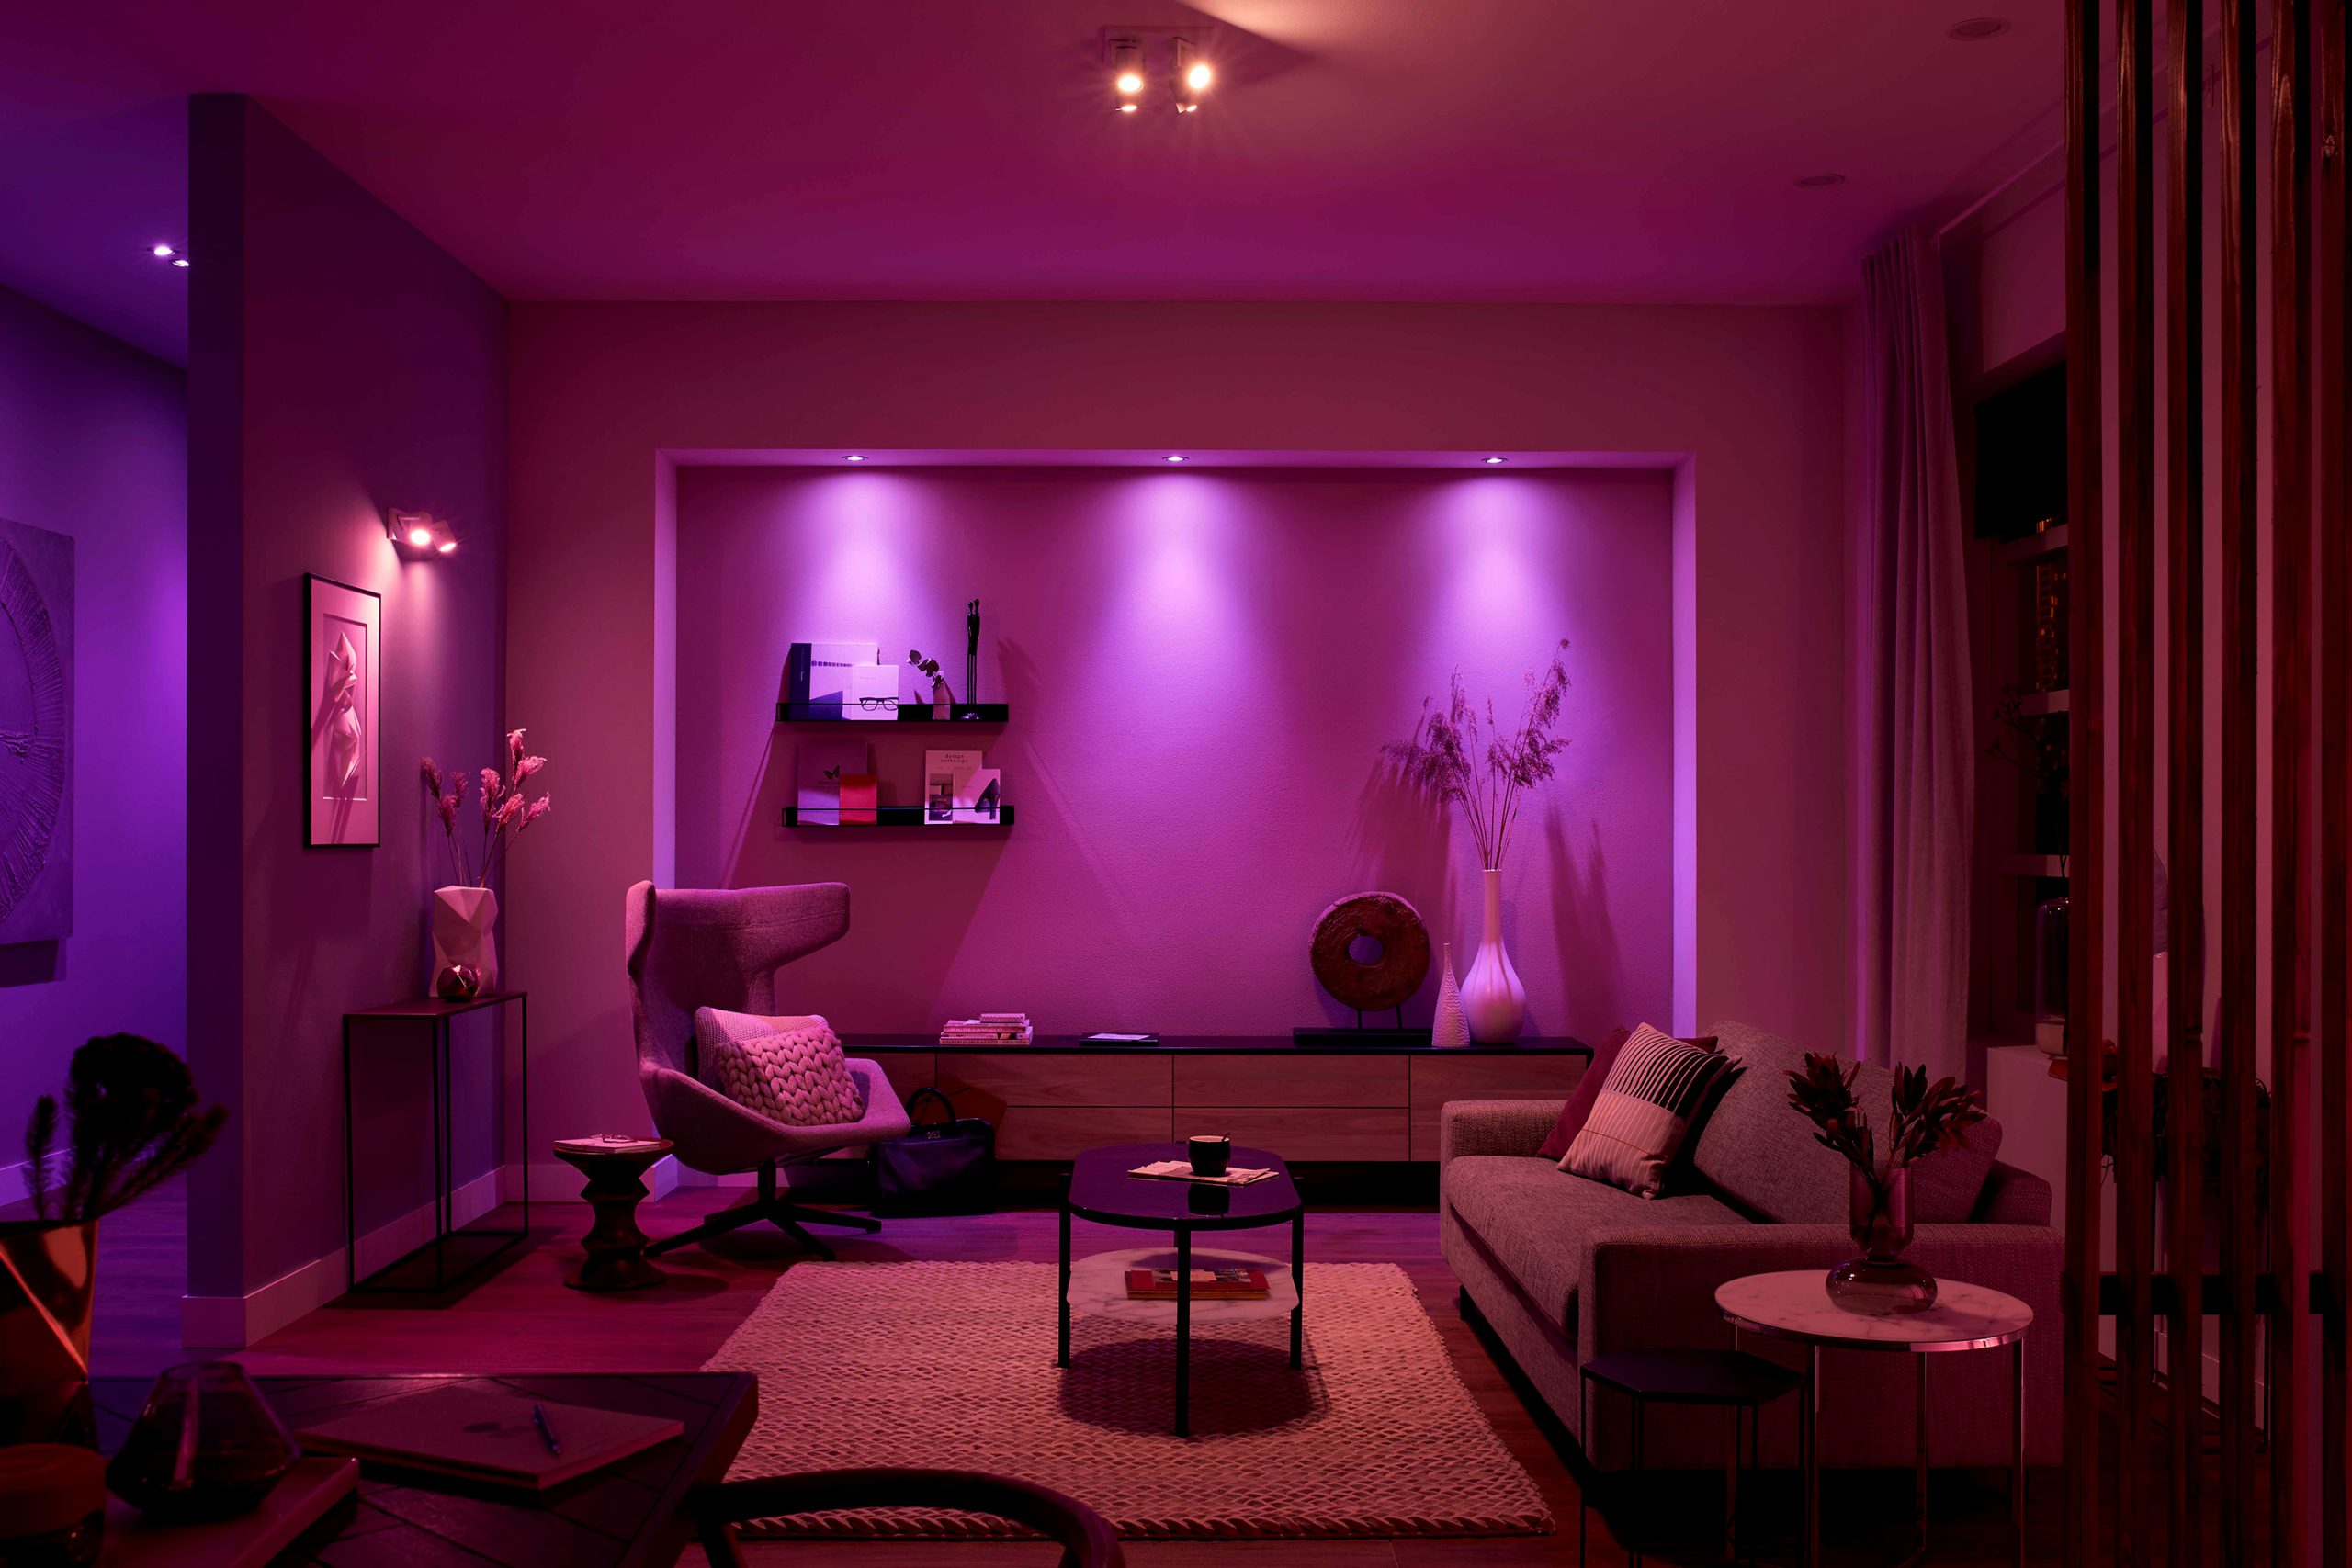 2022 LED Strip Ideas: Great Ideas To Do with LED Strips at home